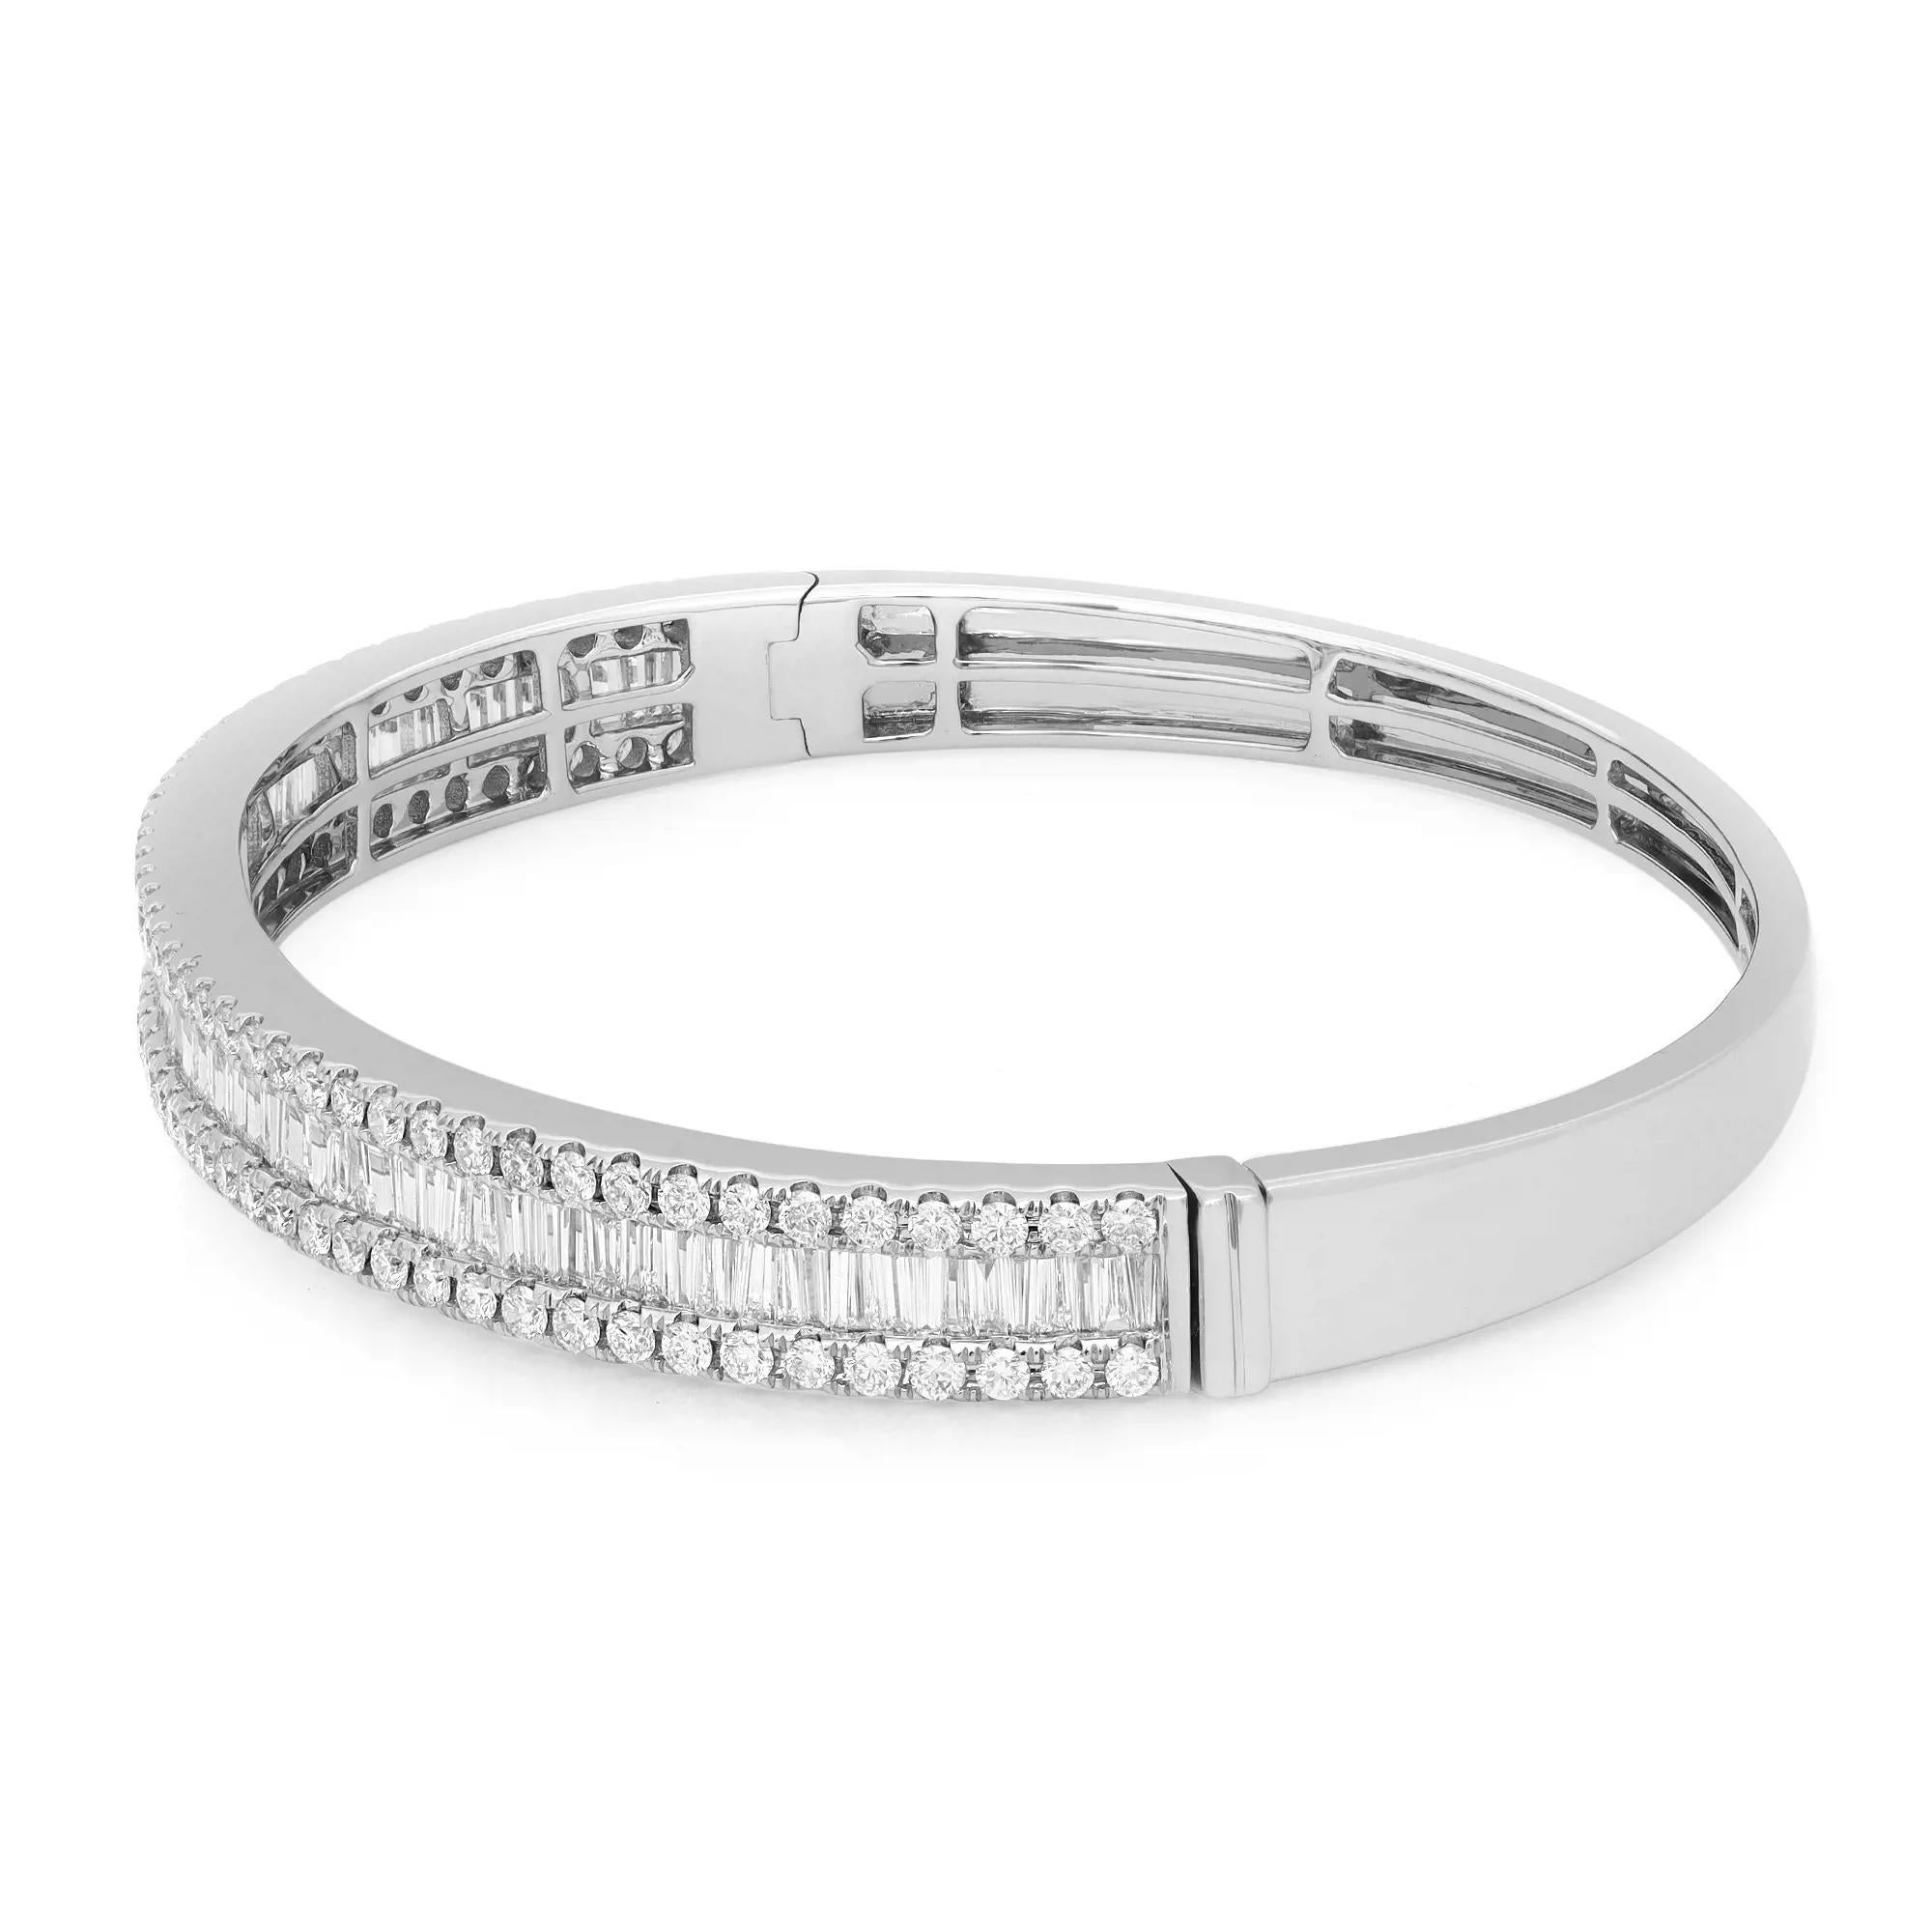 This stunning and exemplary bracelet is crafted in highly polished 18K white gold. Features center row of sparkling channel set baguette cut diamonds with prong set round cut diamonds on both sides. Total diamond weight: 3.12 carats. Set halfway